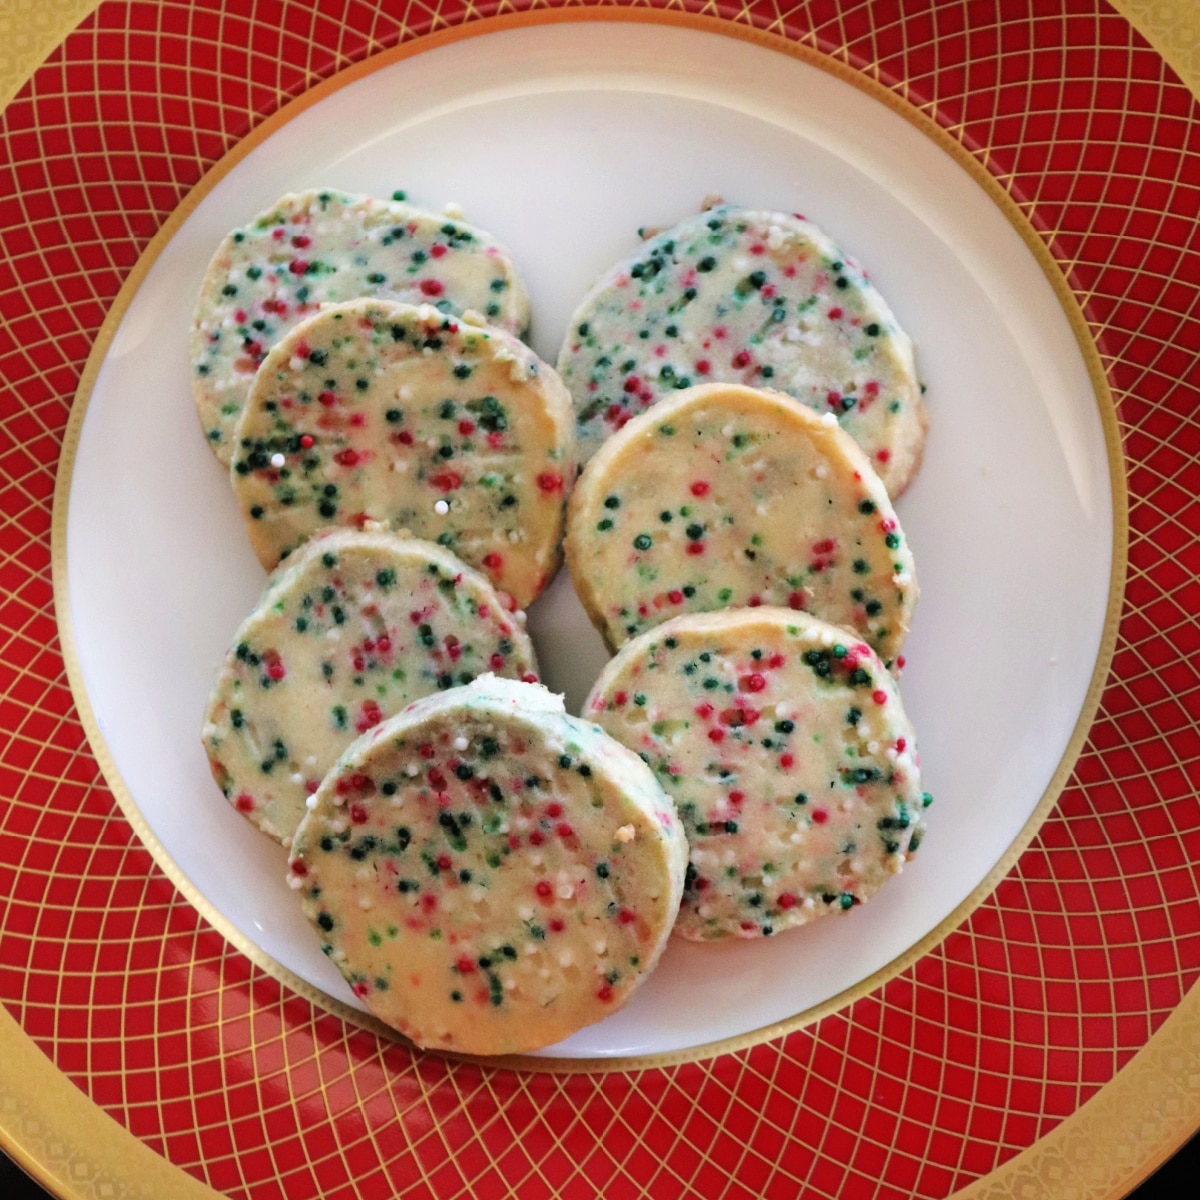 A close up image of 7 Christmas funfetti cookies on a red and gold plate.